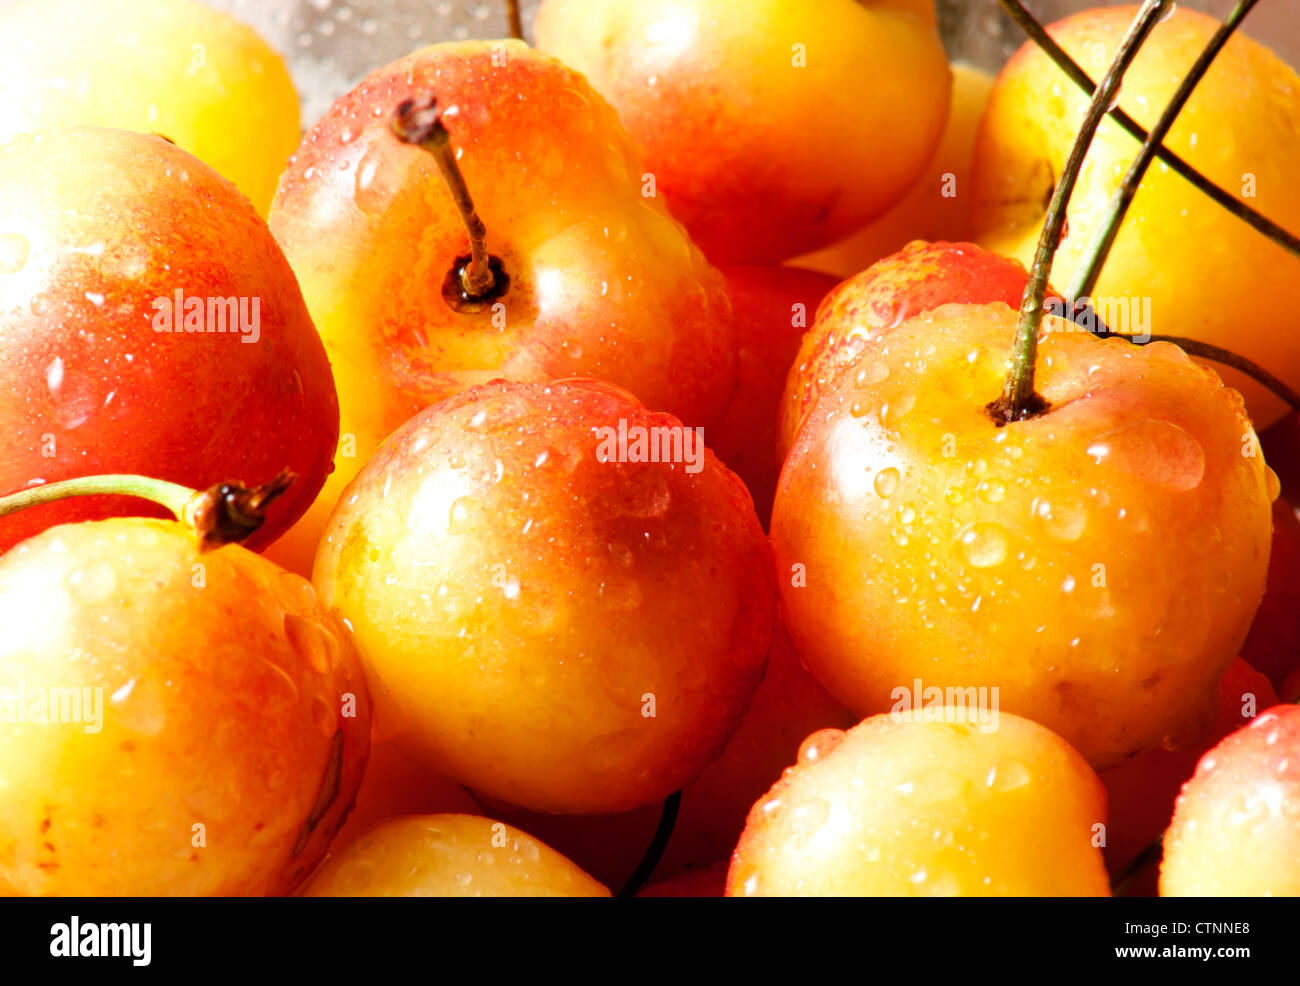 Bunch of yellow and red Rainier cherries isolated on white background with copy space. Stock Photo